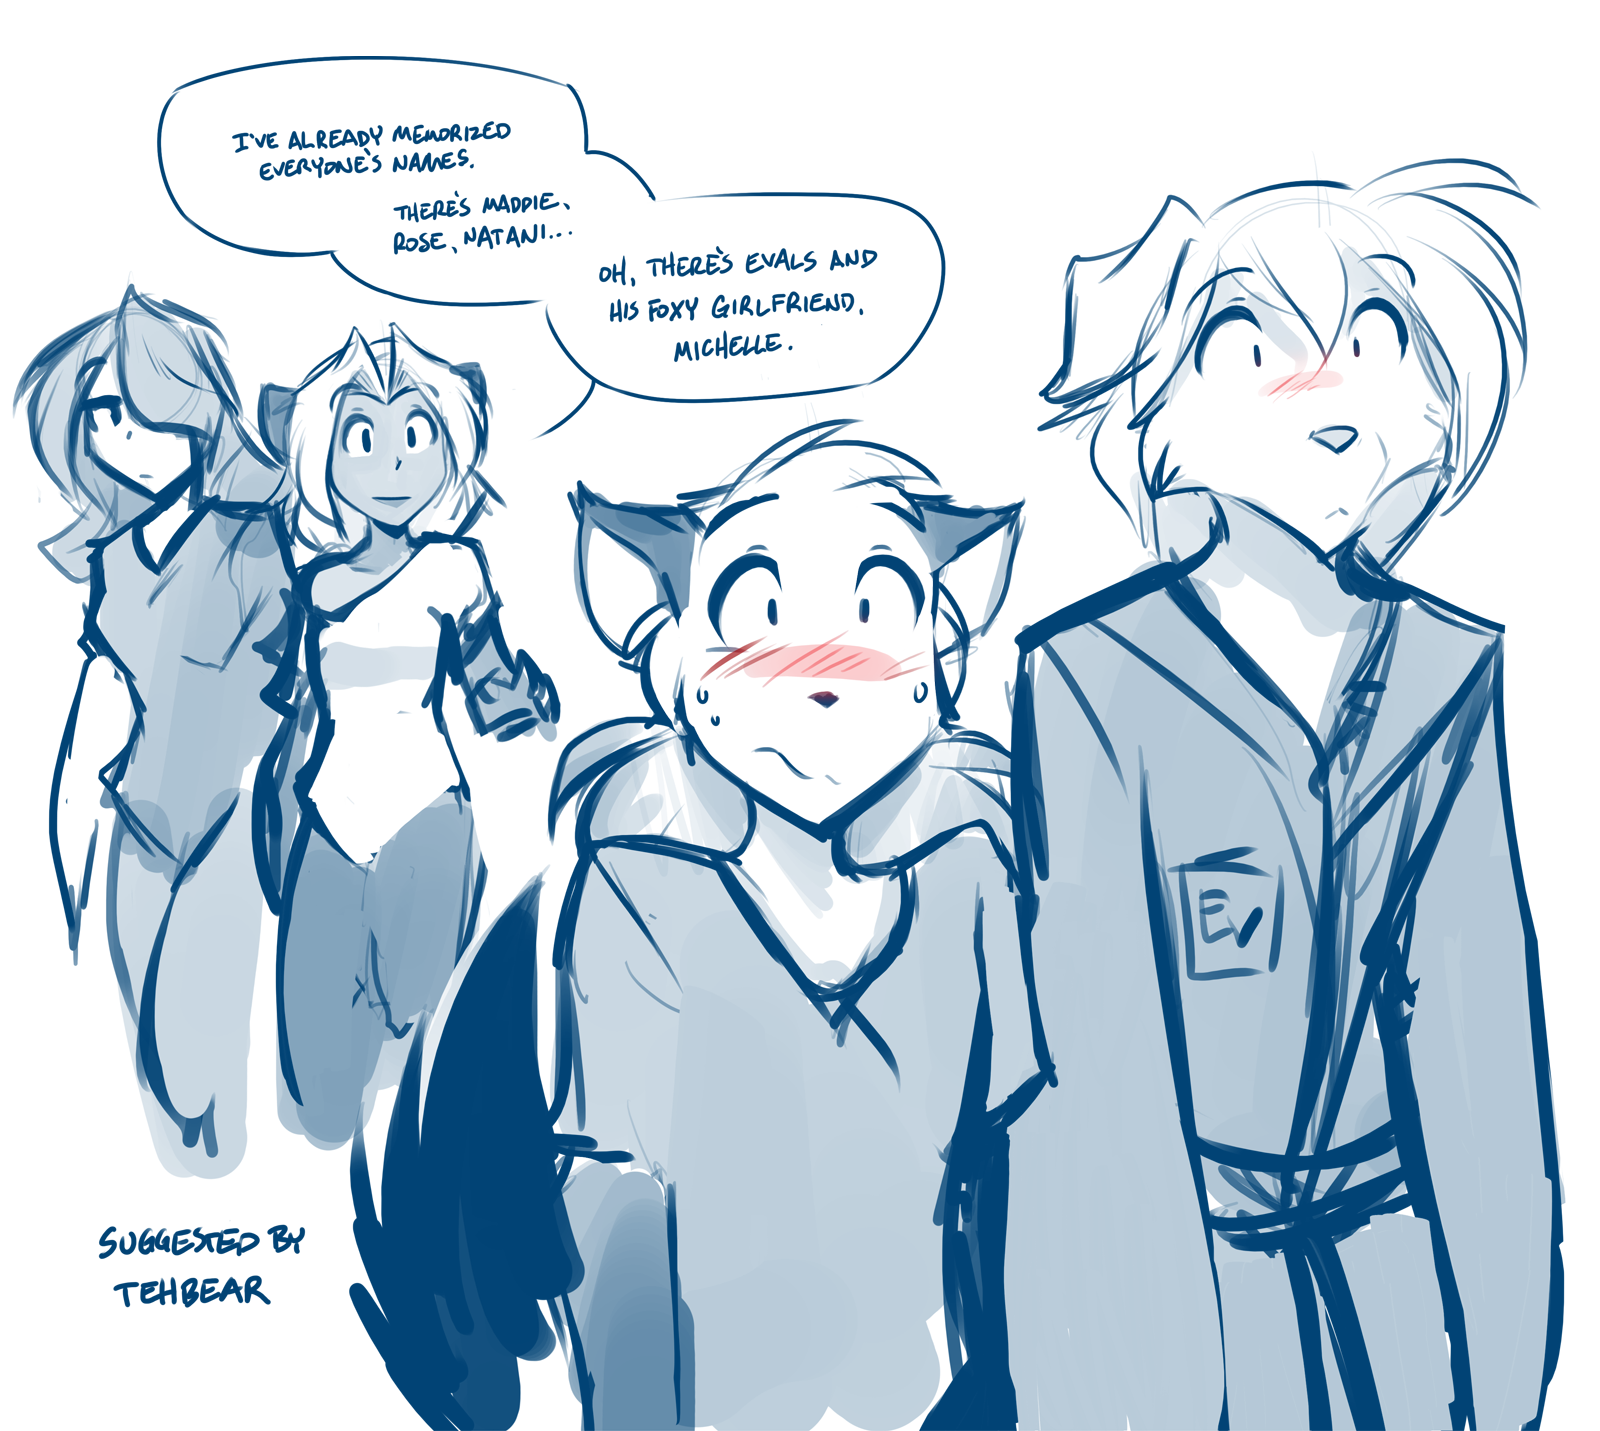 Official Arts with tags: Evals, Maren, Mike, Sketch.